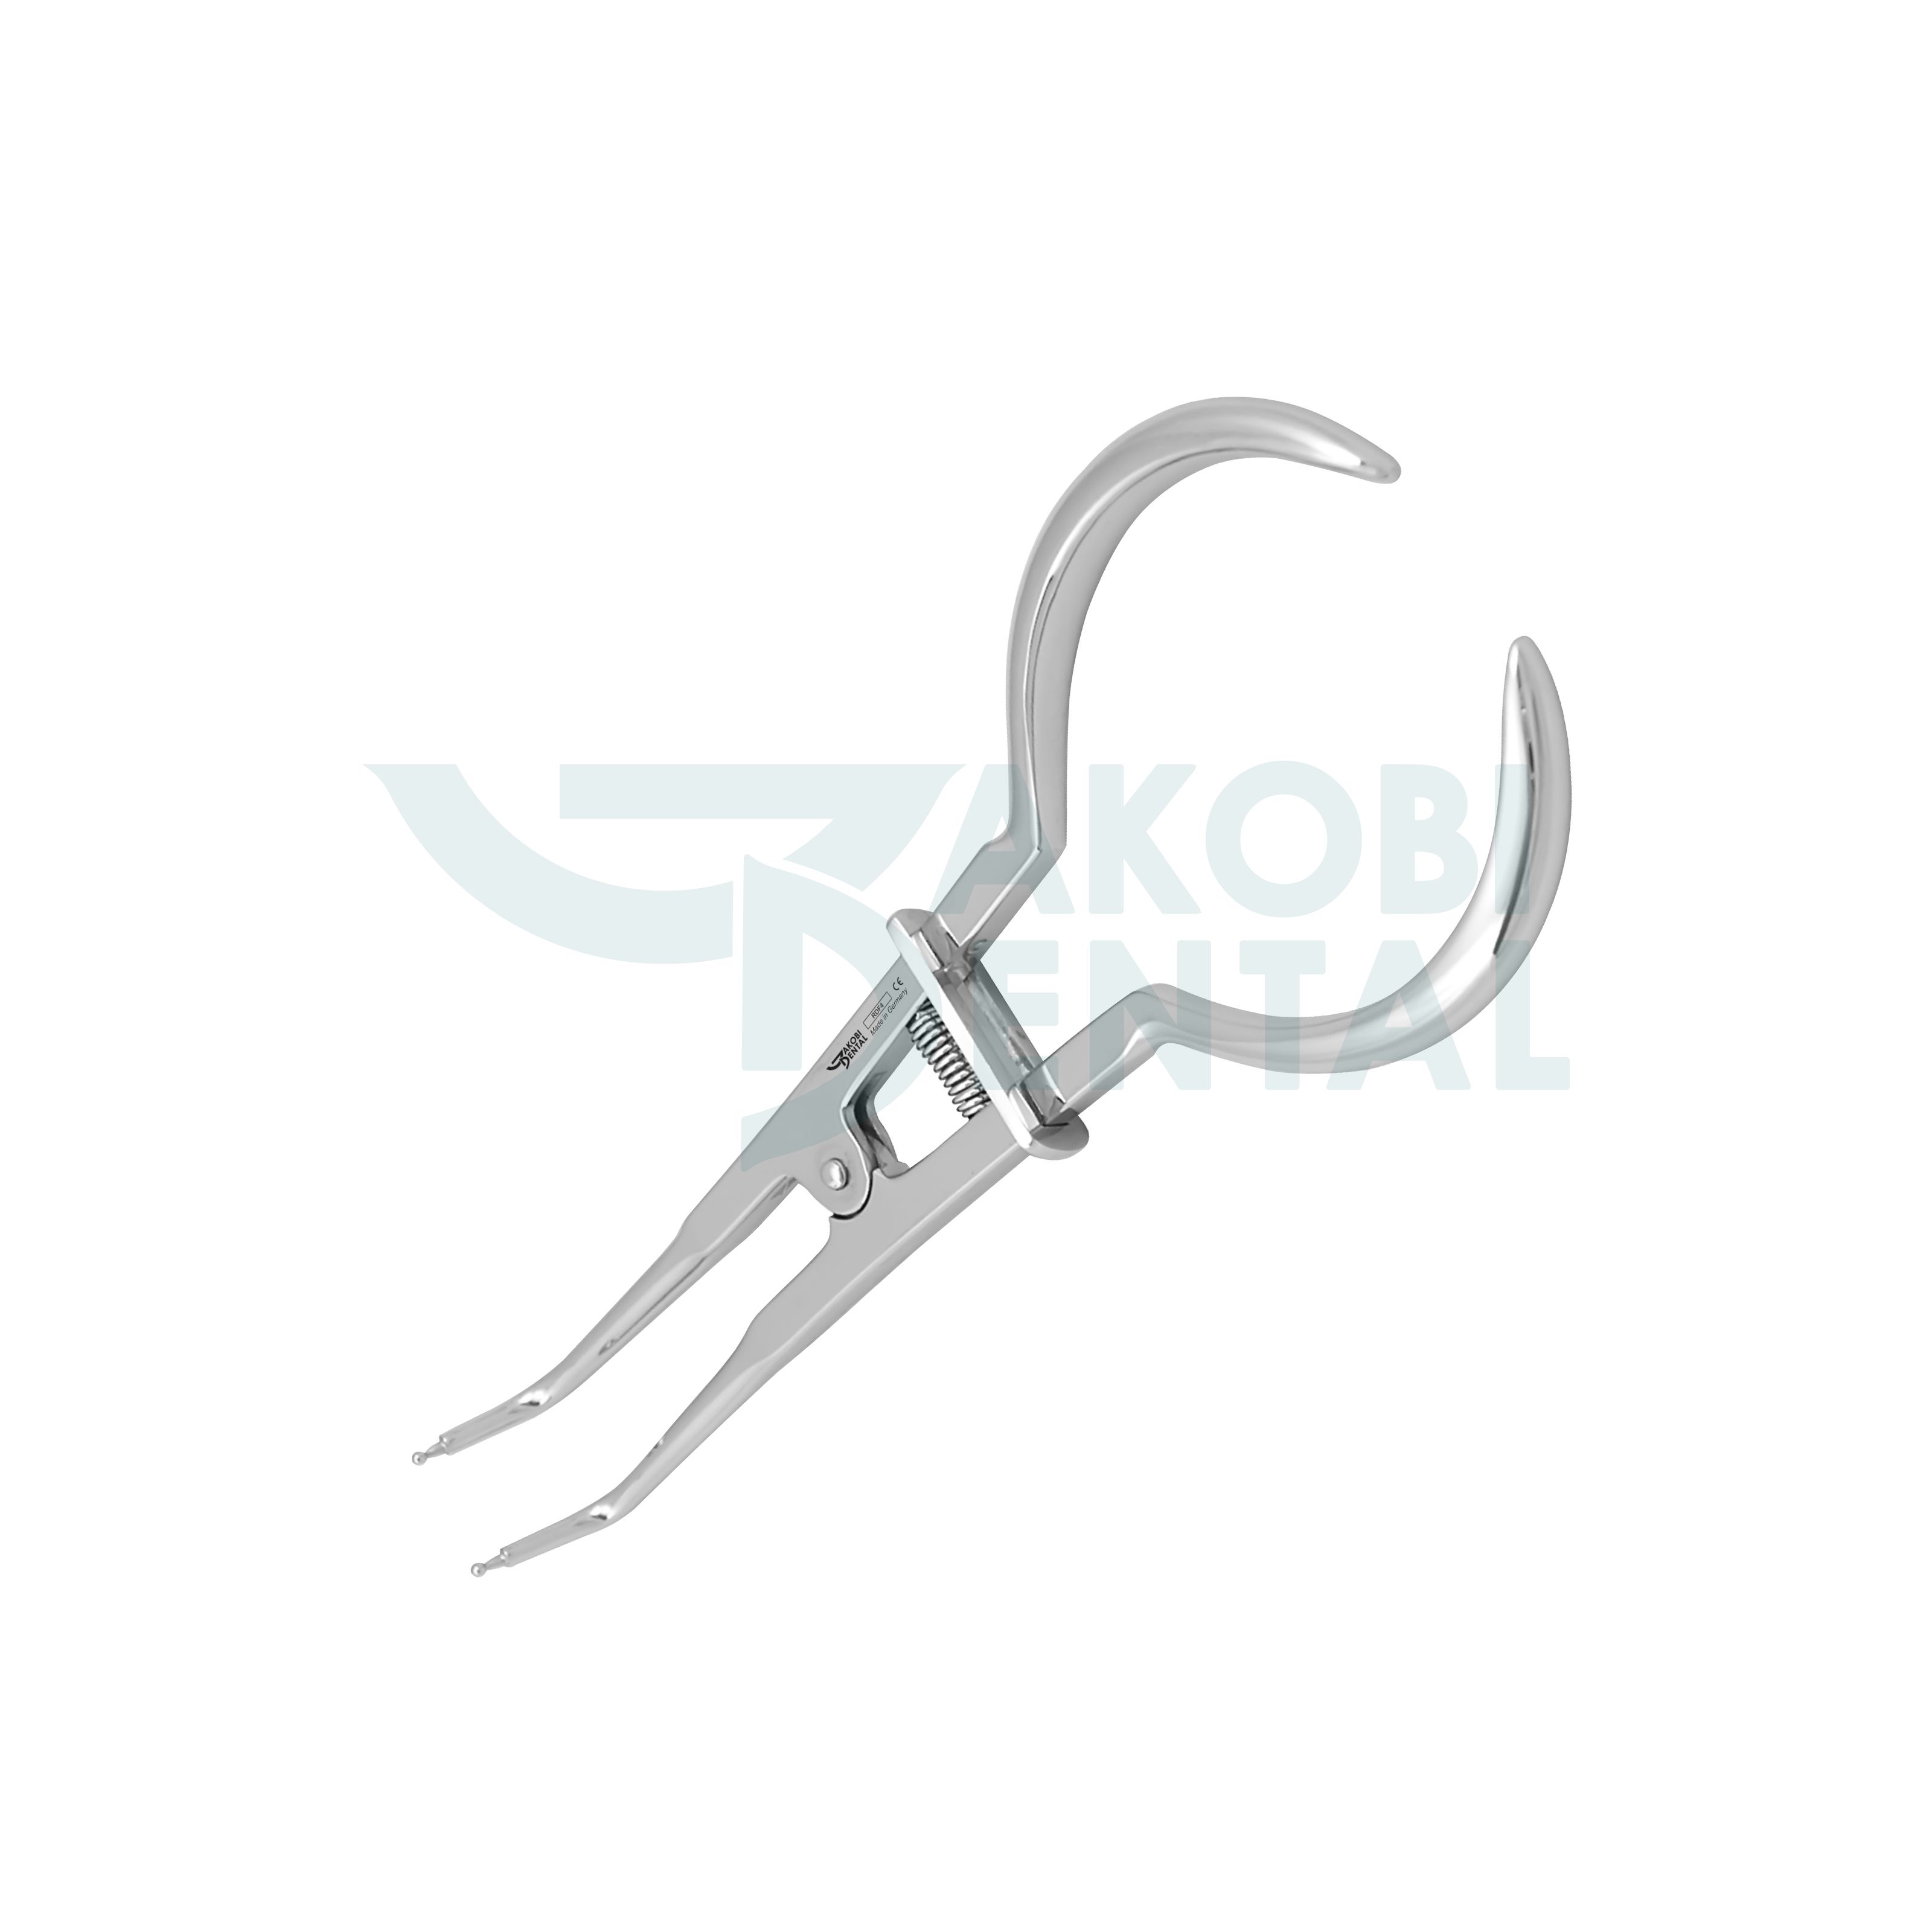 Rubberdam Clamp forceps RDF4 Palmer, stainless steel